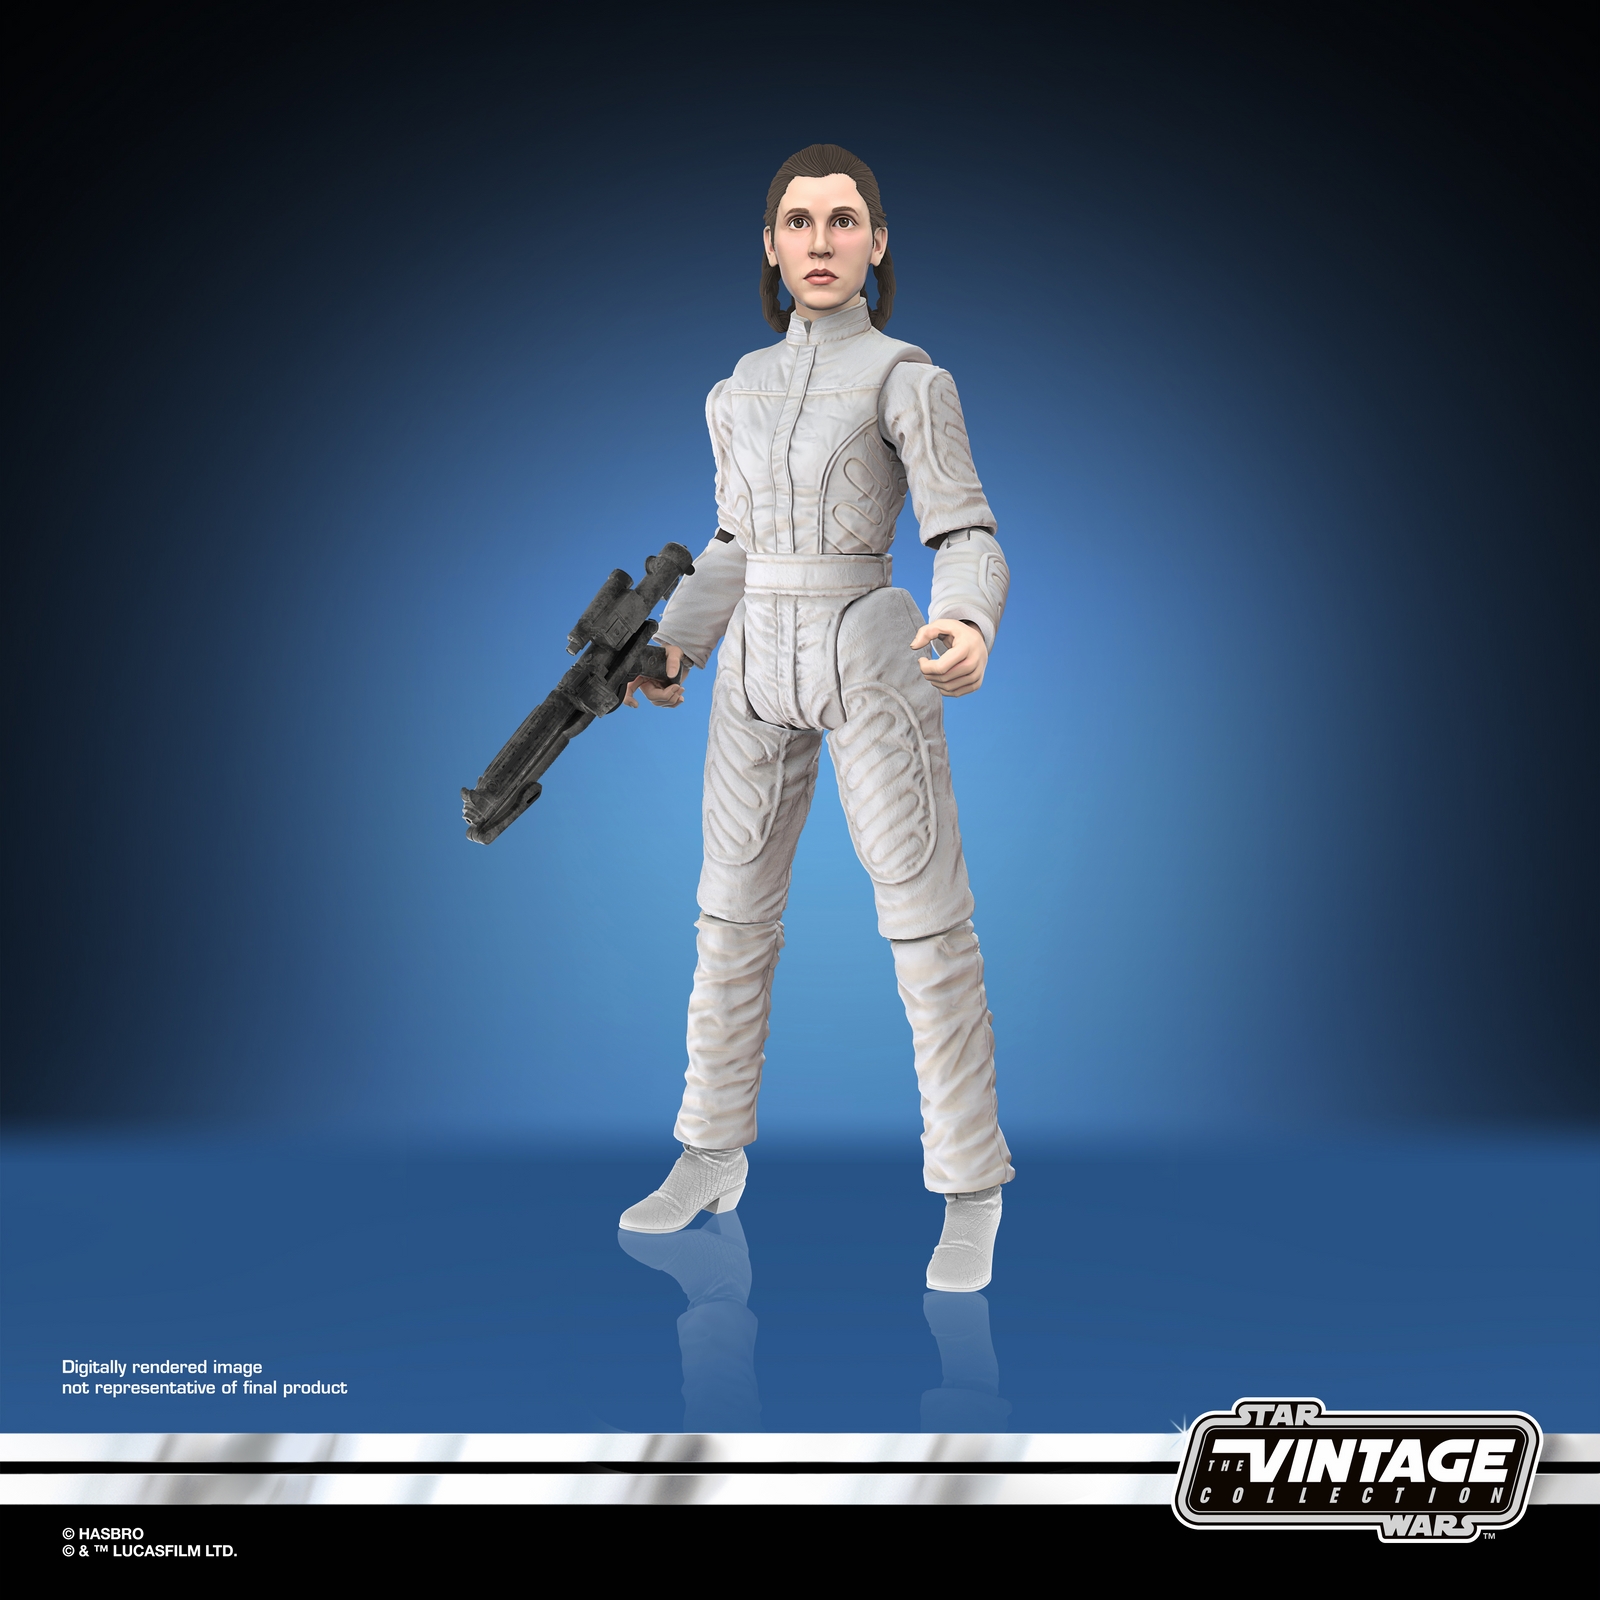 STAR WARS THE VINTAGE COLLECTION 3.75-INCH PRINCESS LEIA ORGANA (BESPIN ESCAPE) Figure - digital oop (3).jpg